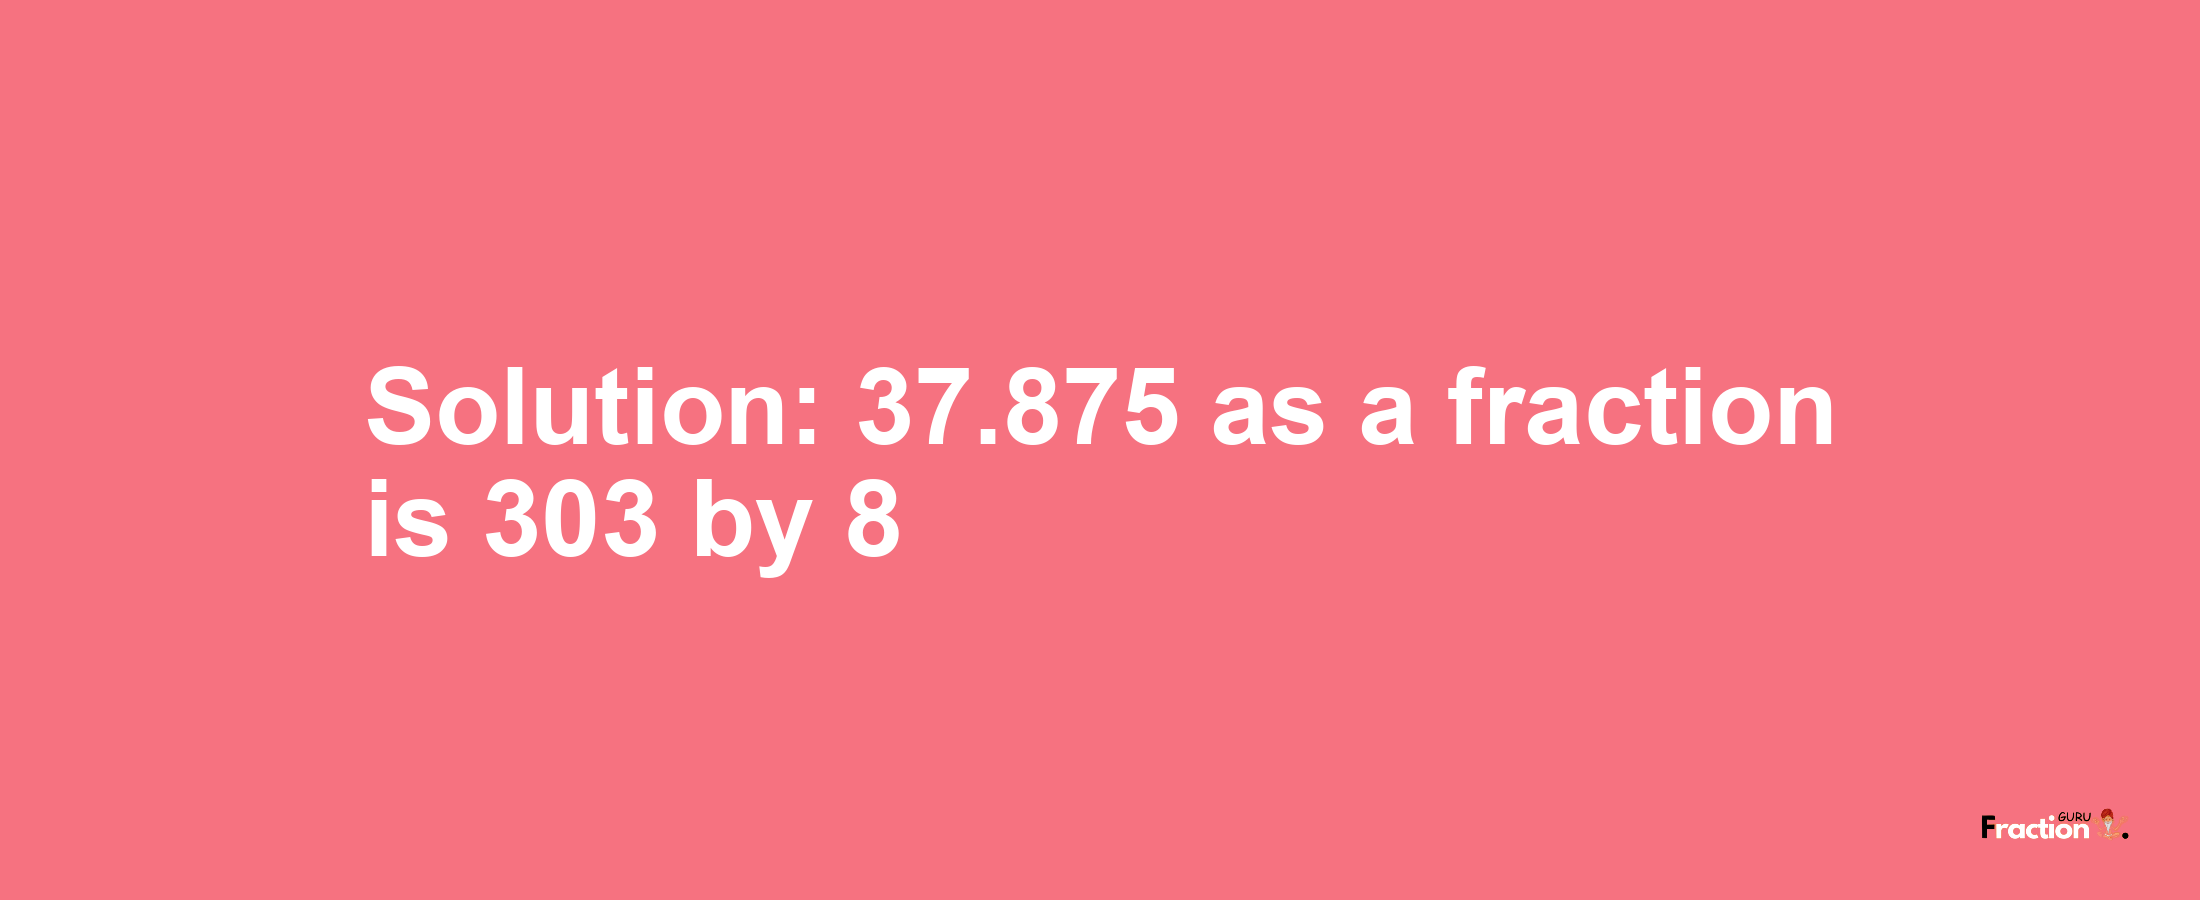 Solution:37.875 as a fraction is 303/8